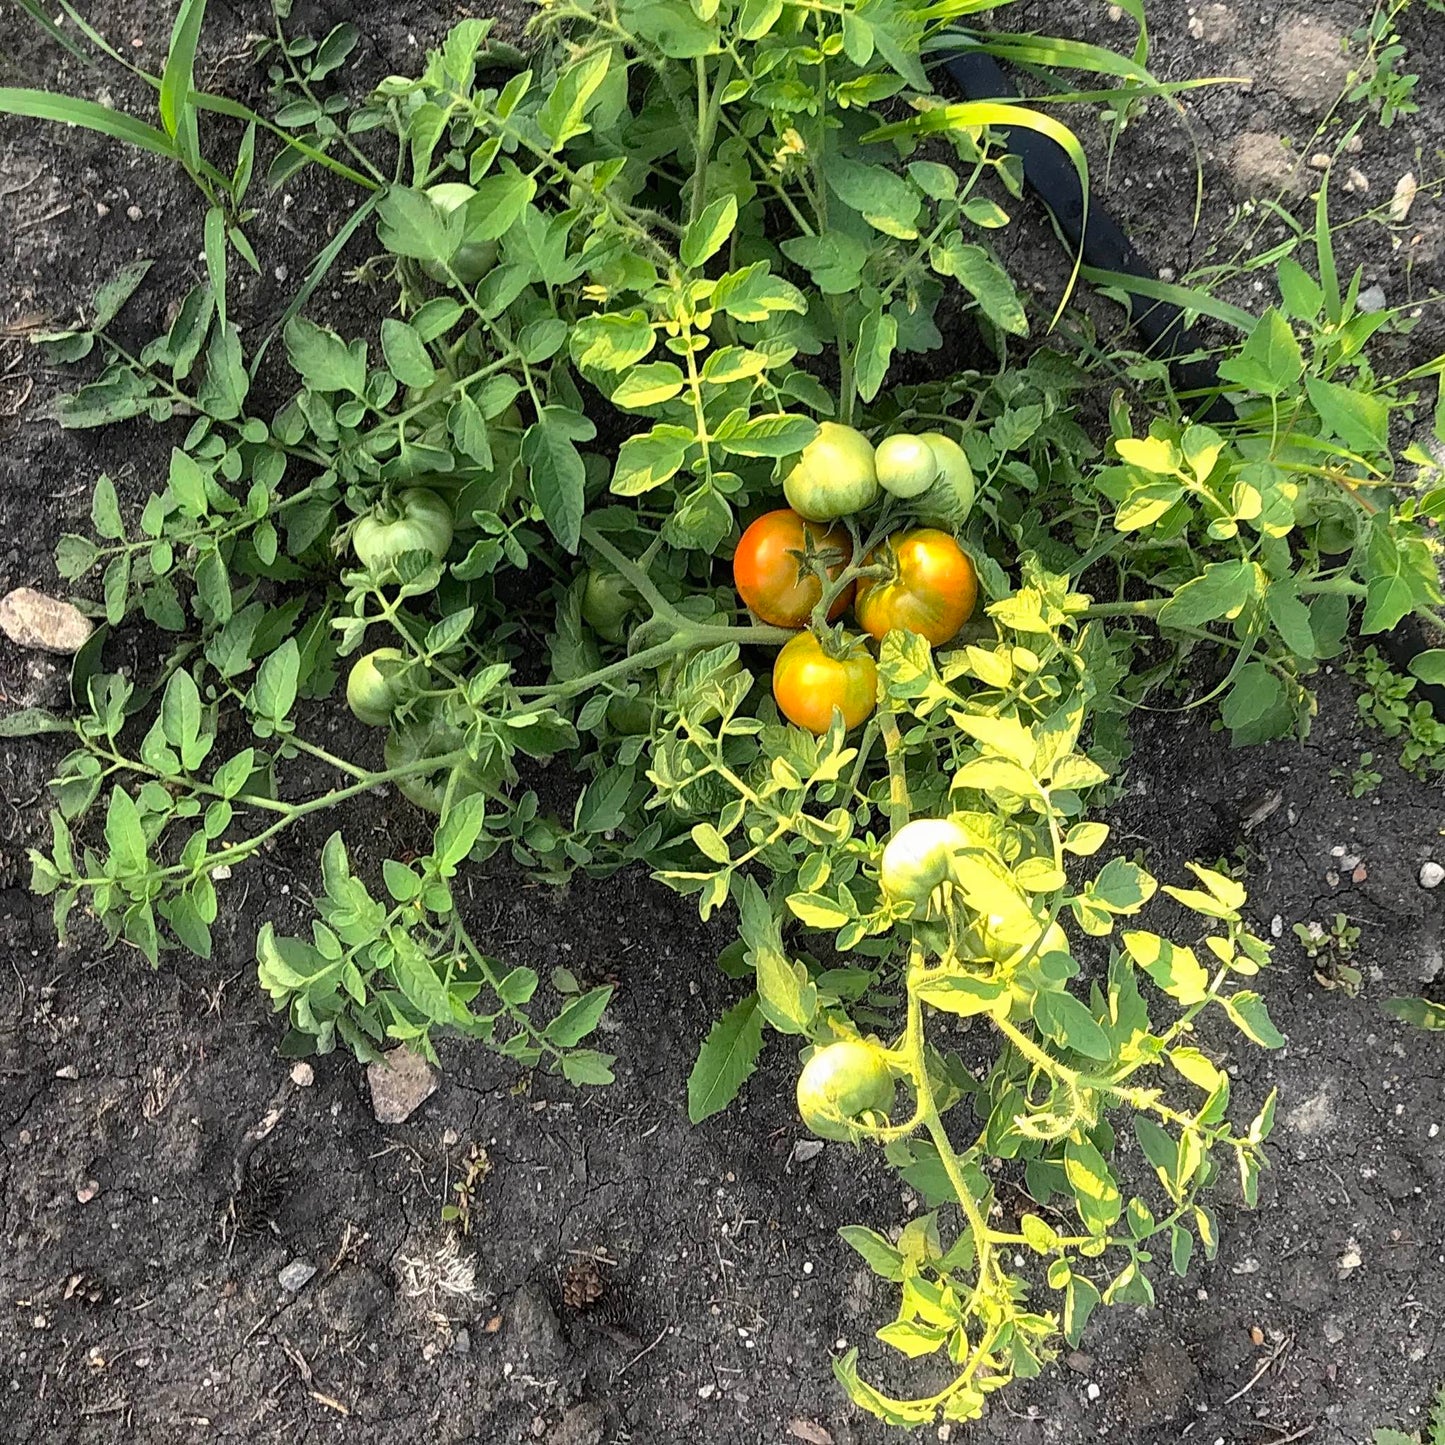 Tomato plant with fruit almost ripe.